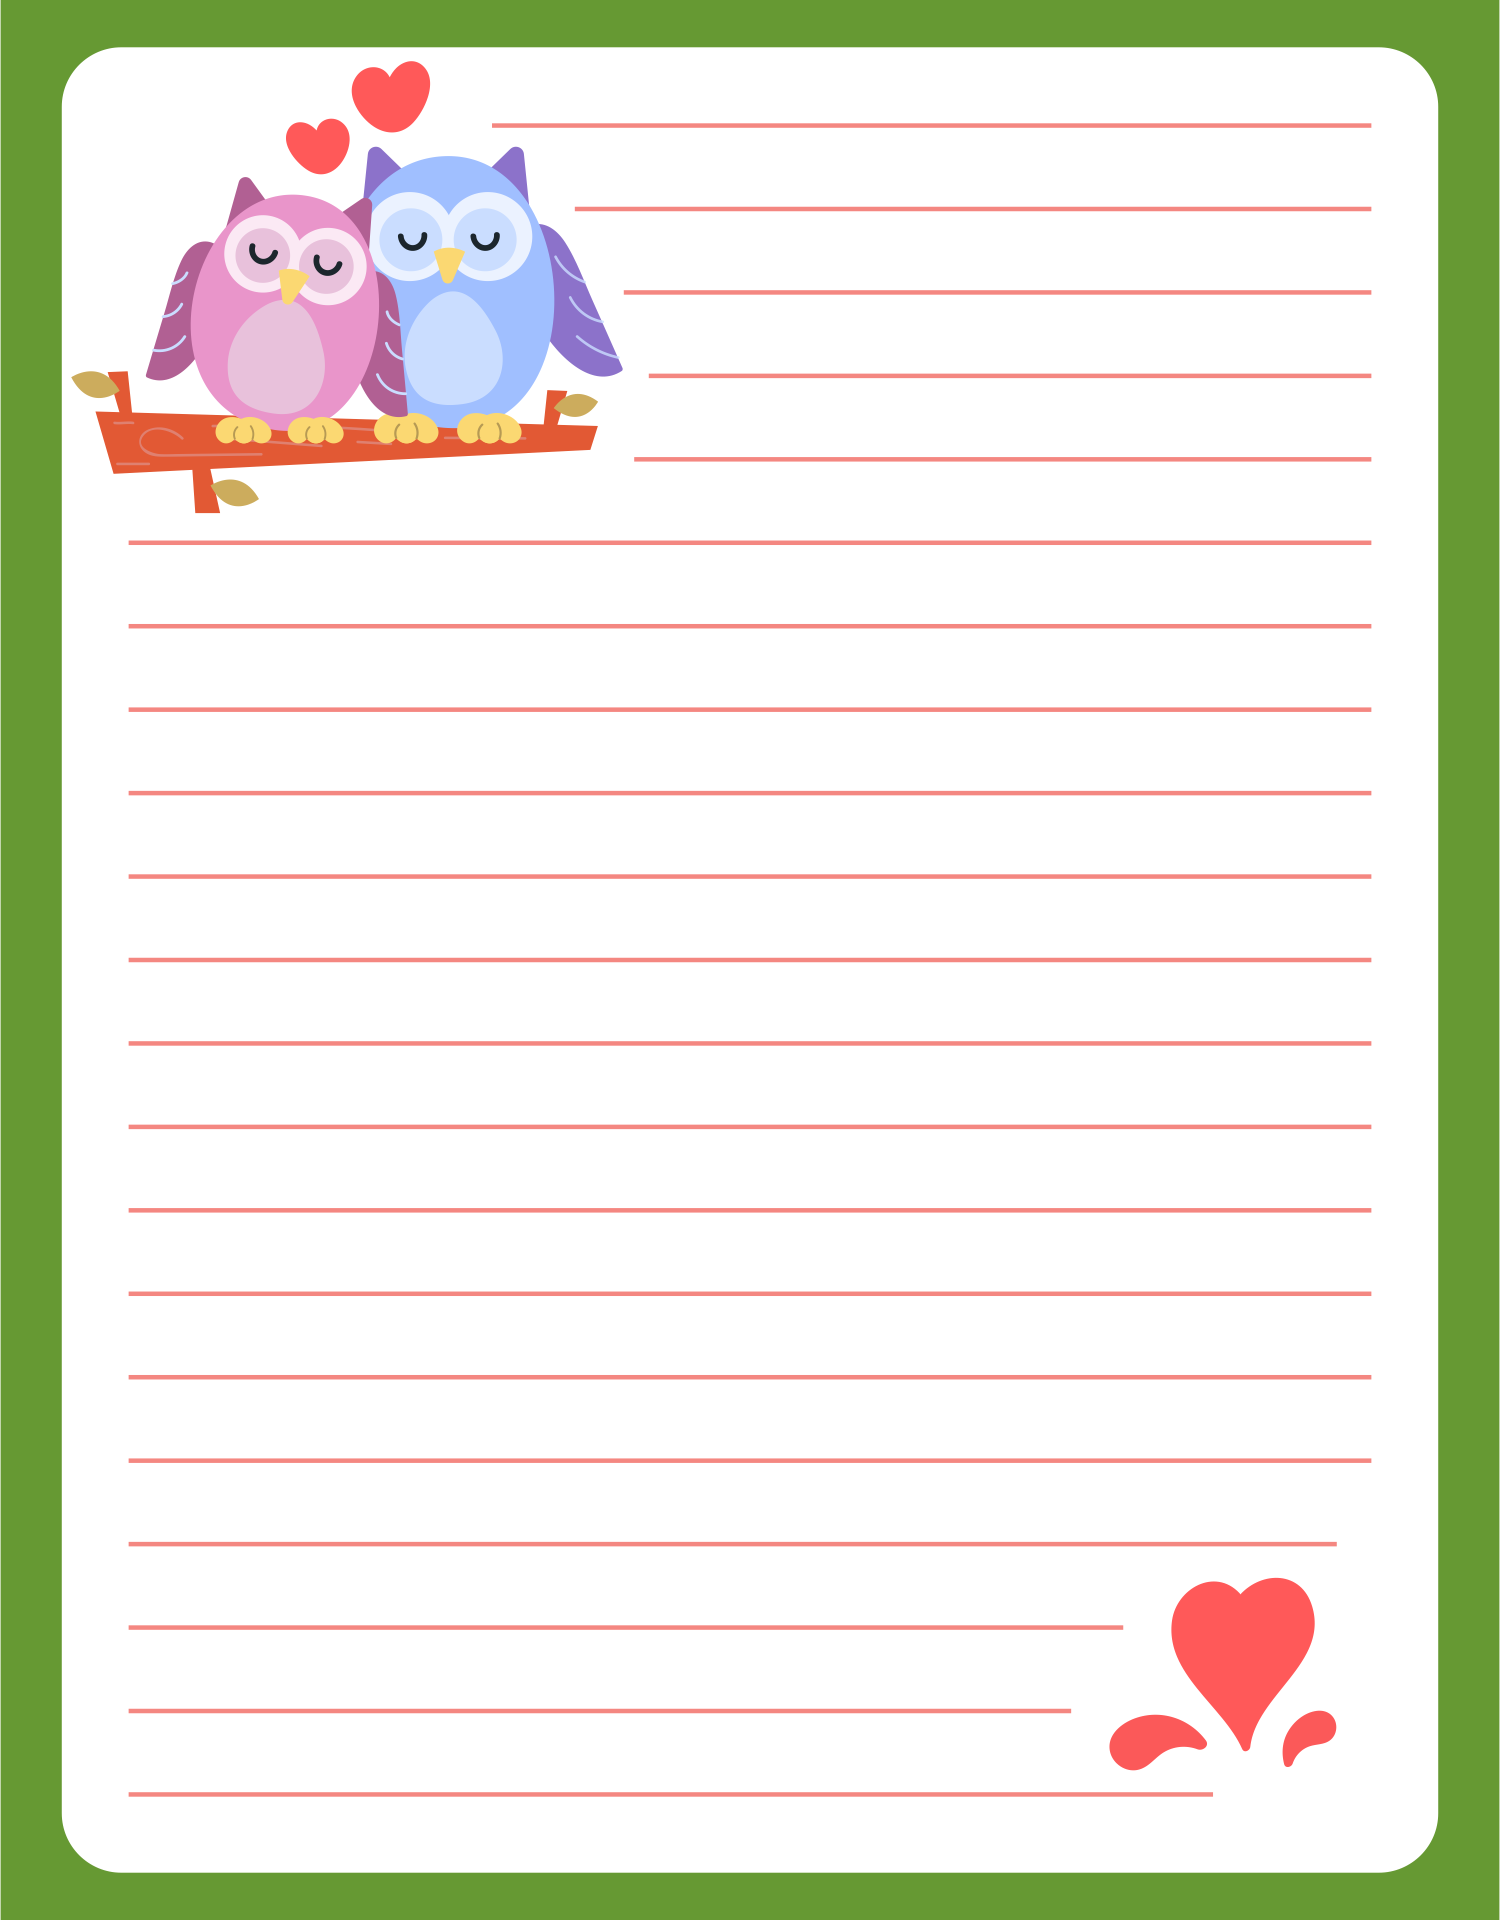 9 Best Images of Printable Letter Paper Cute - Cute Writing Paper, Free ...